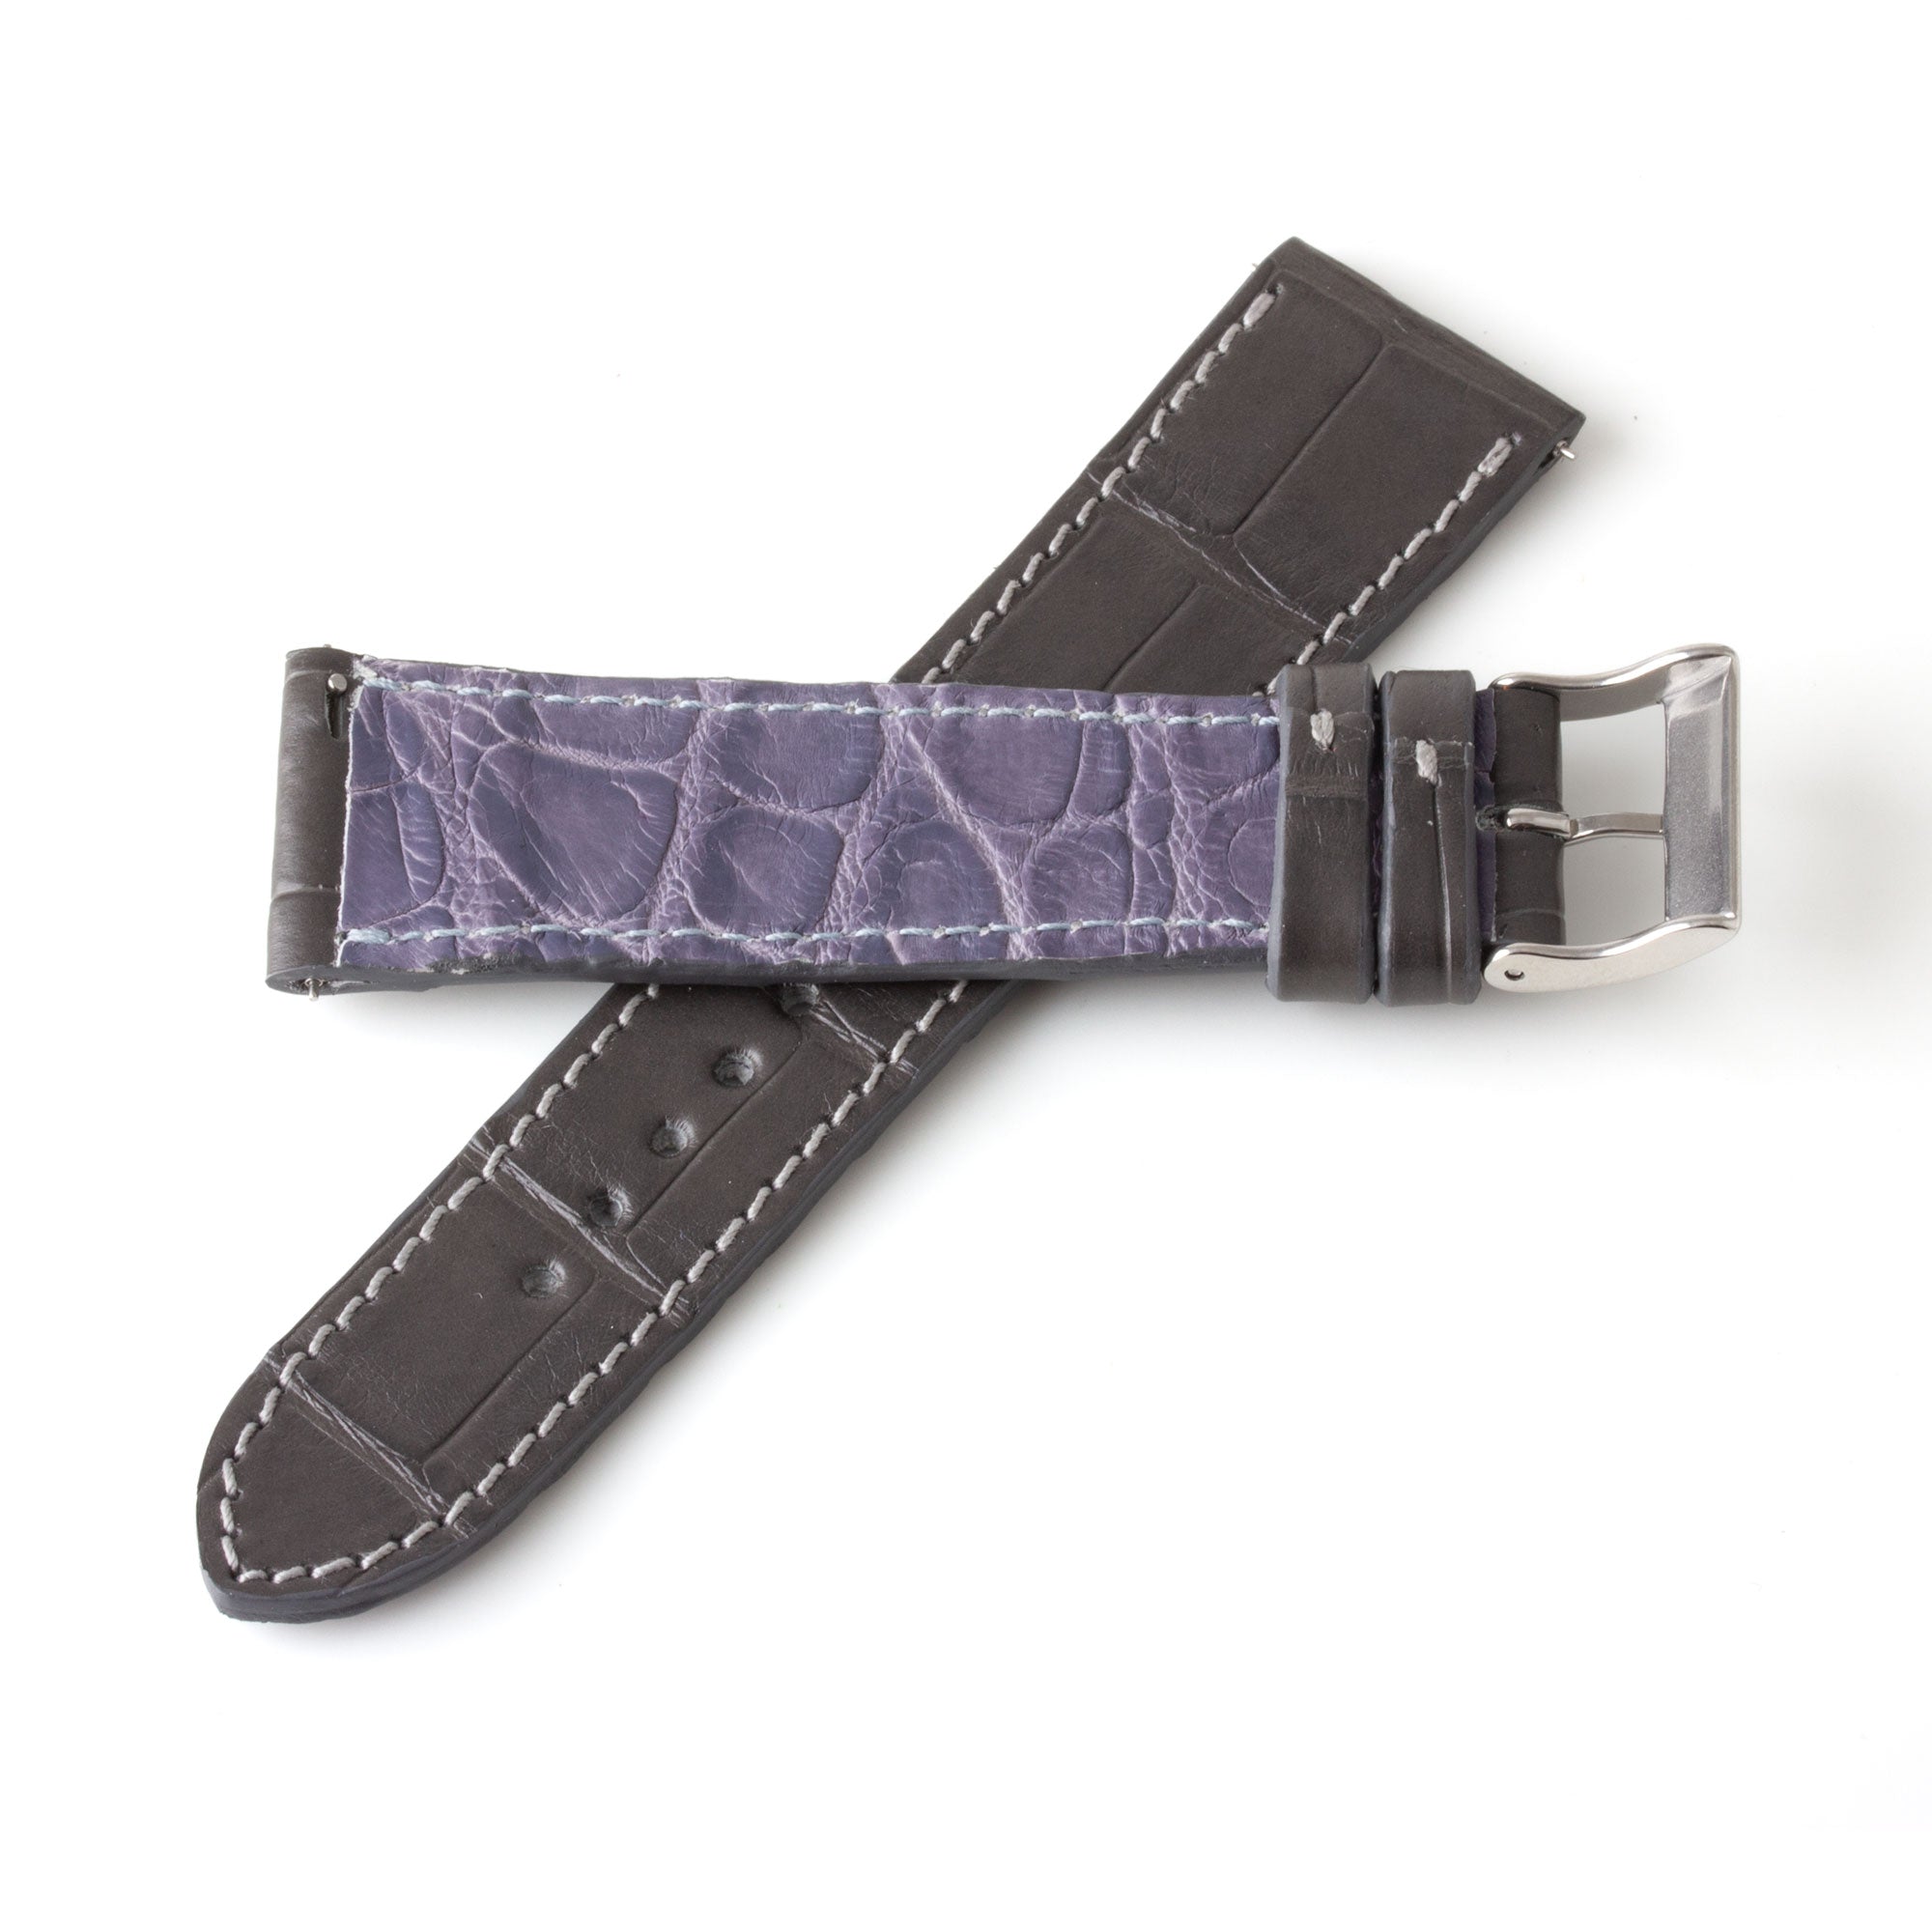 Alligator "Solo" leather watch band - 22mm width (0.87 inches) / Size M (n° 9)